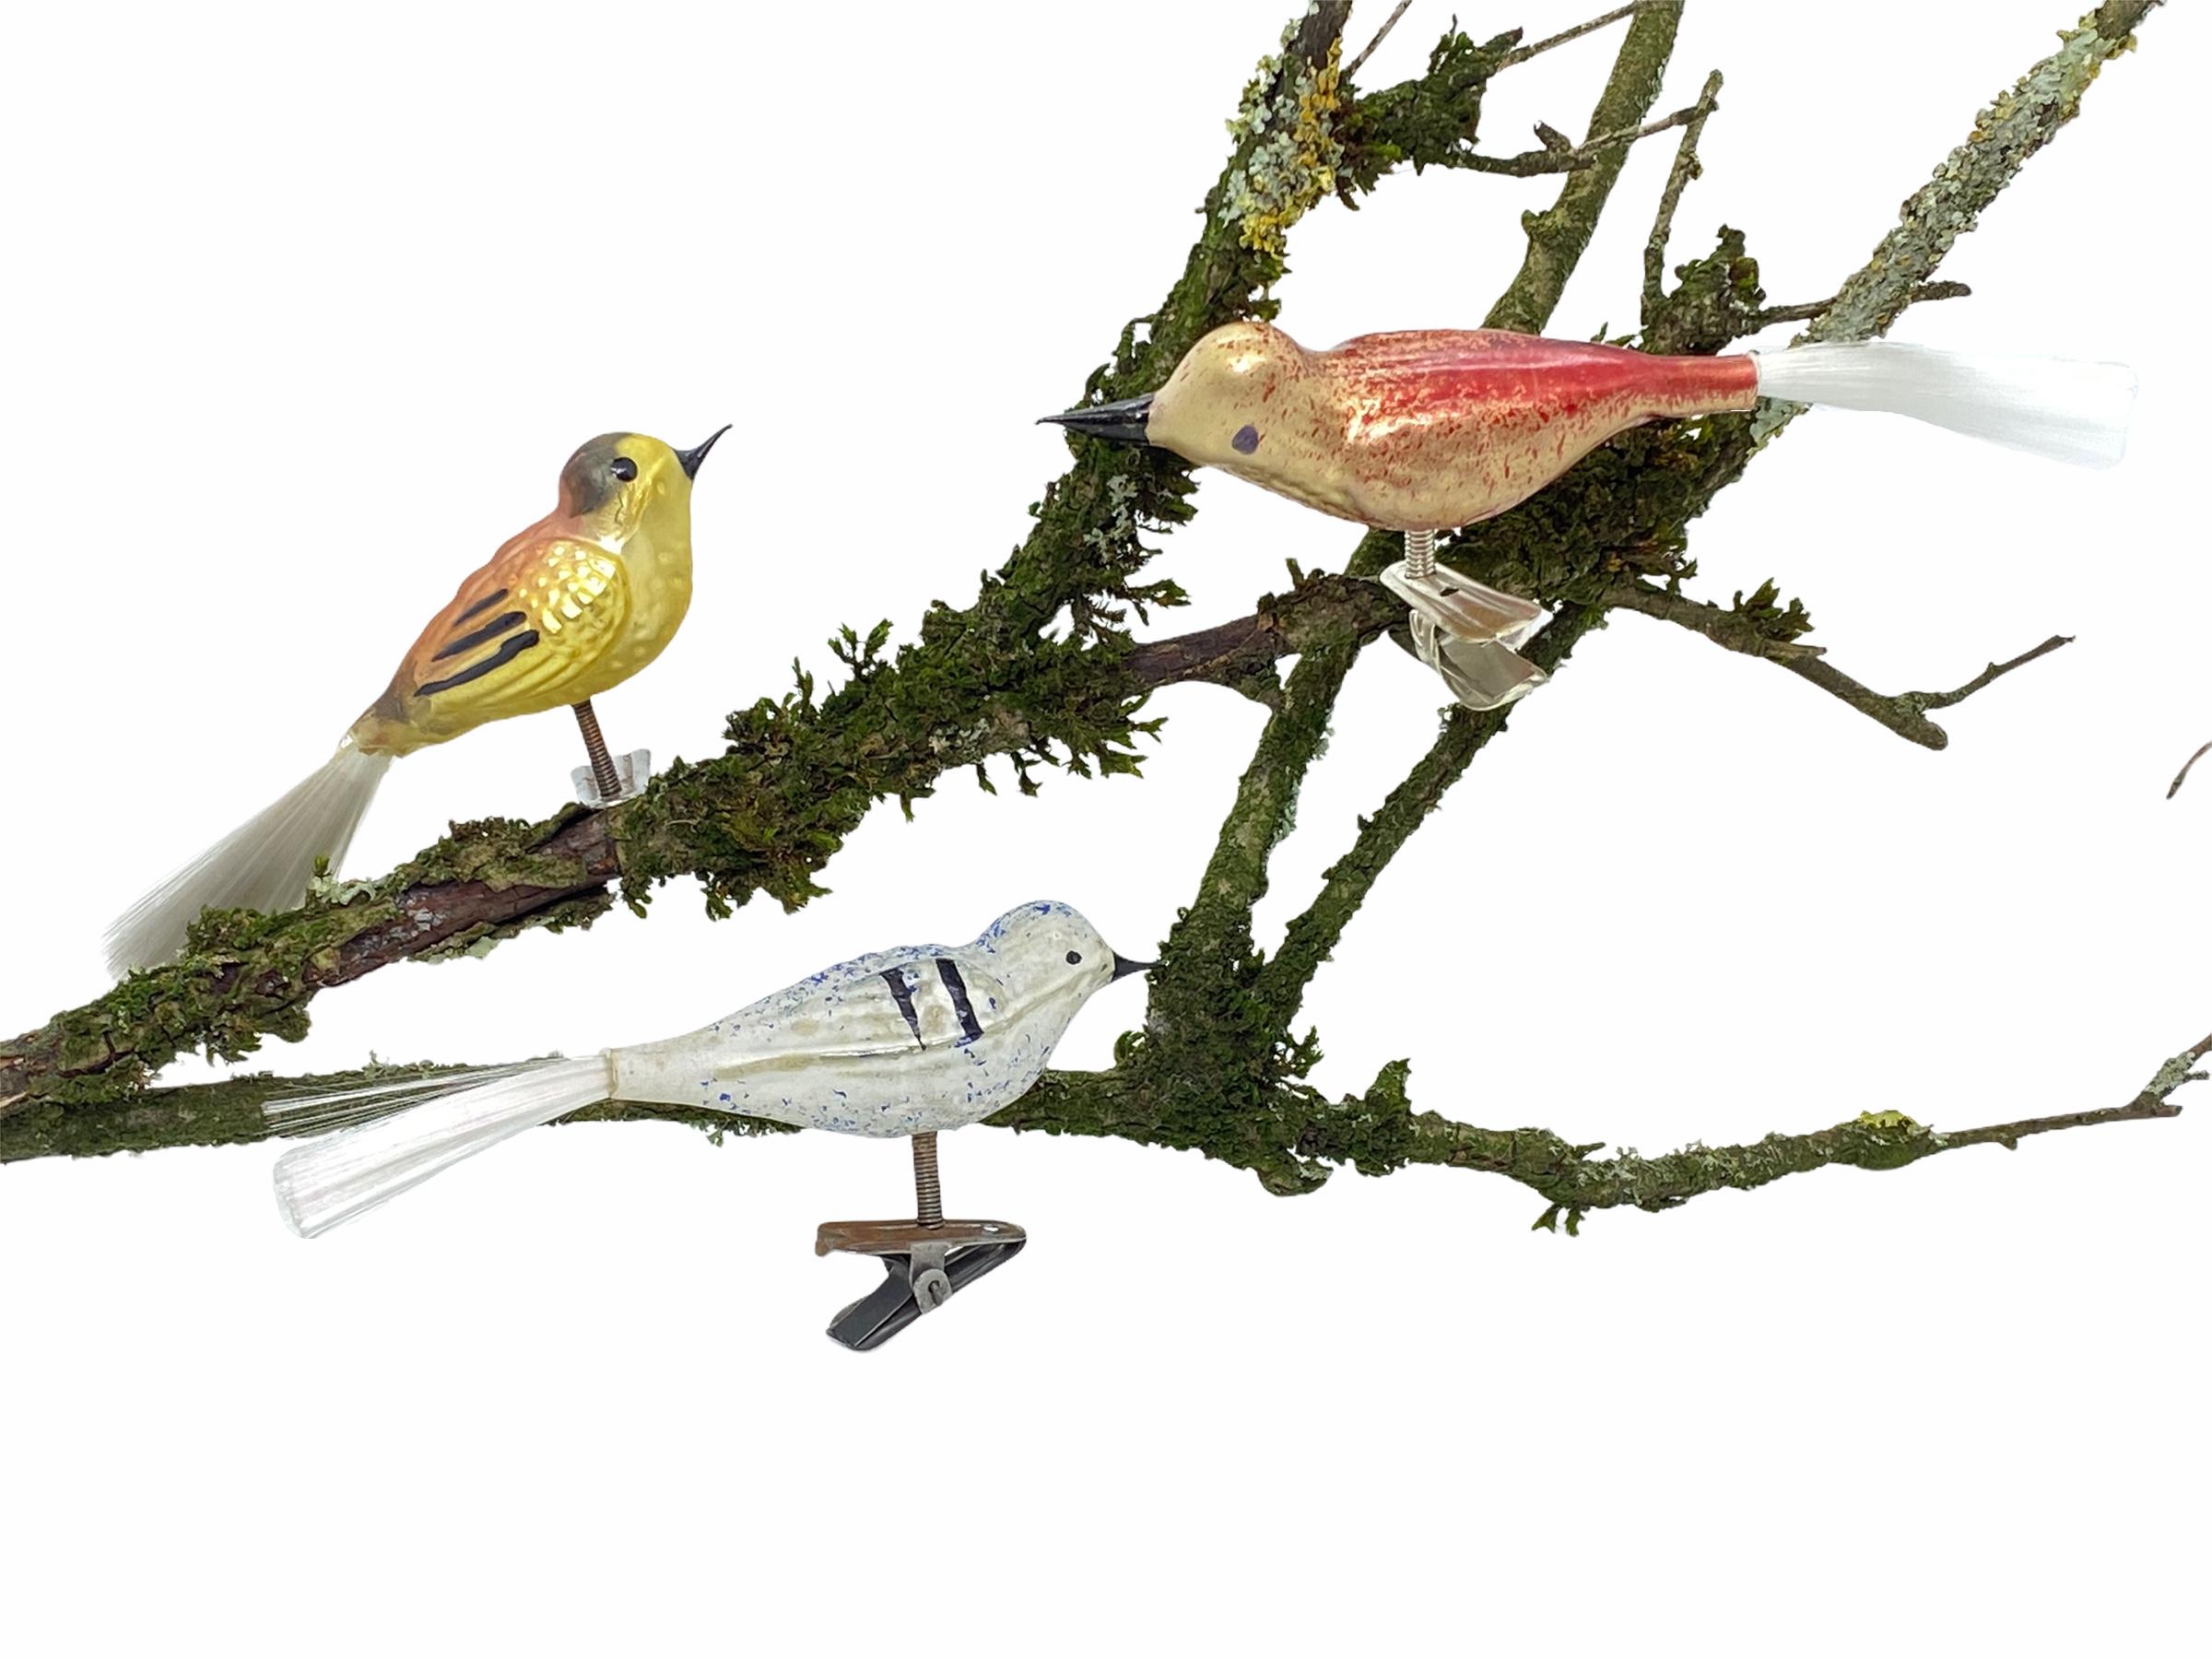 A rare vintage clip-on bird ornament collection. Tallest one measures approximate 1 5/8